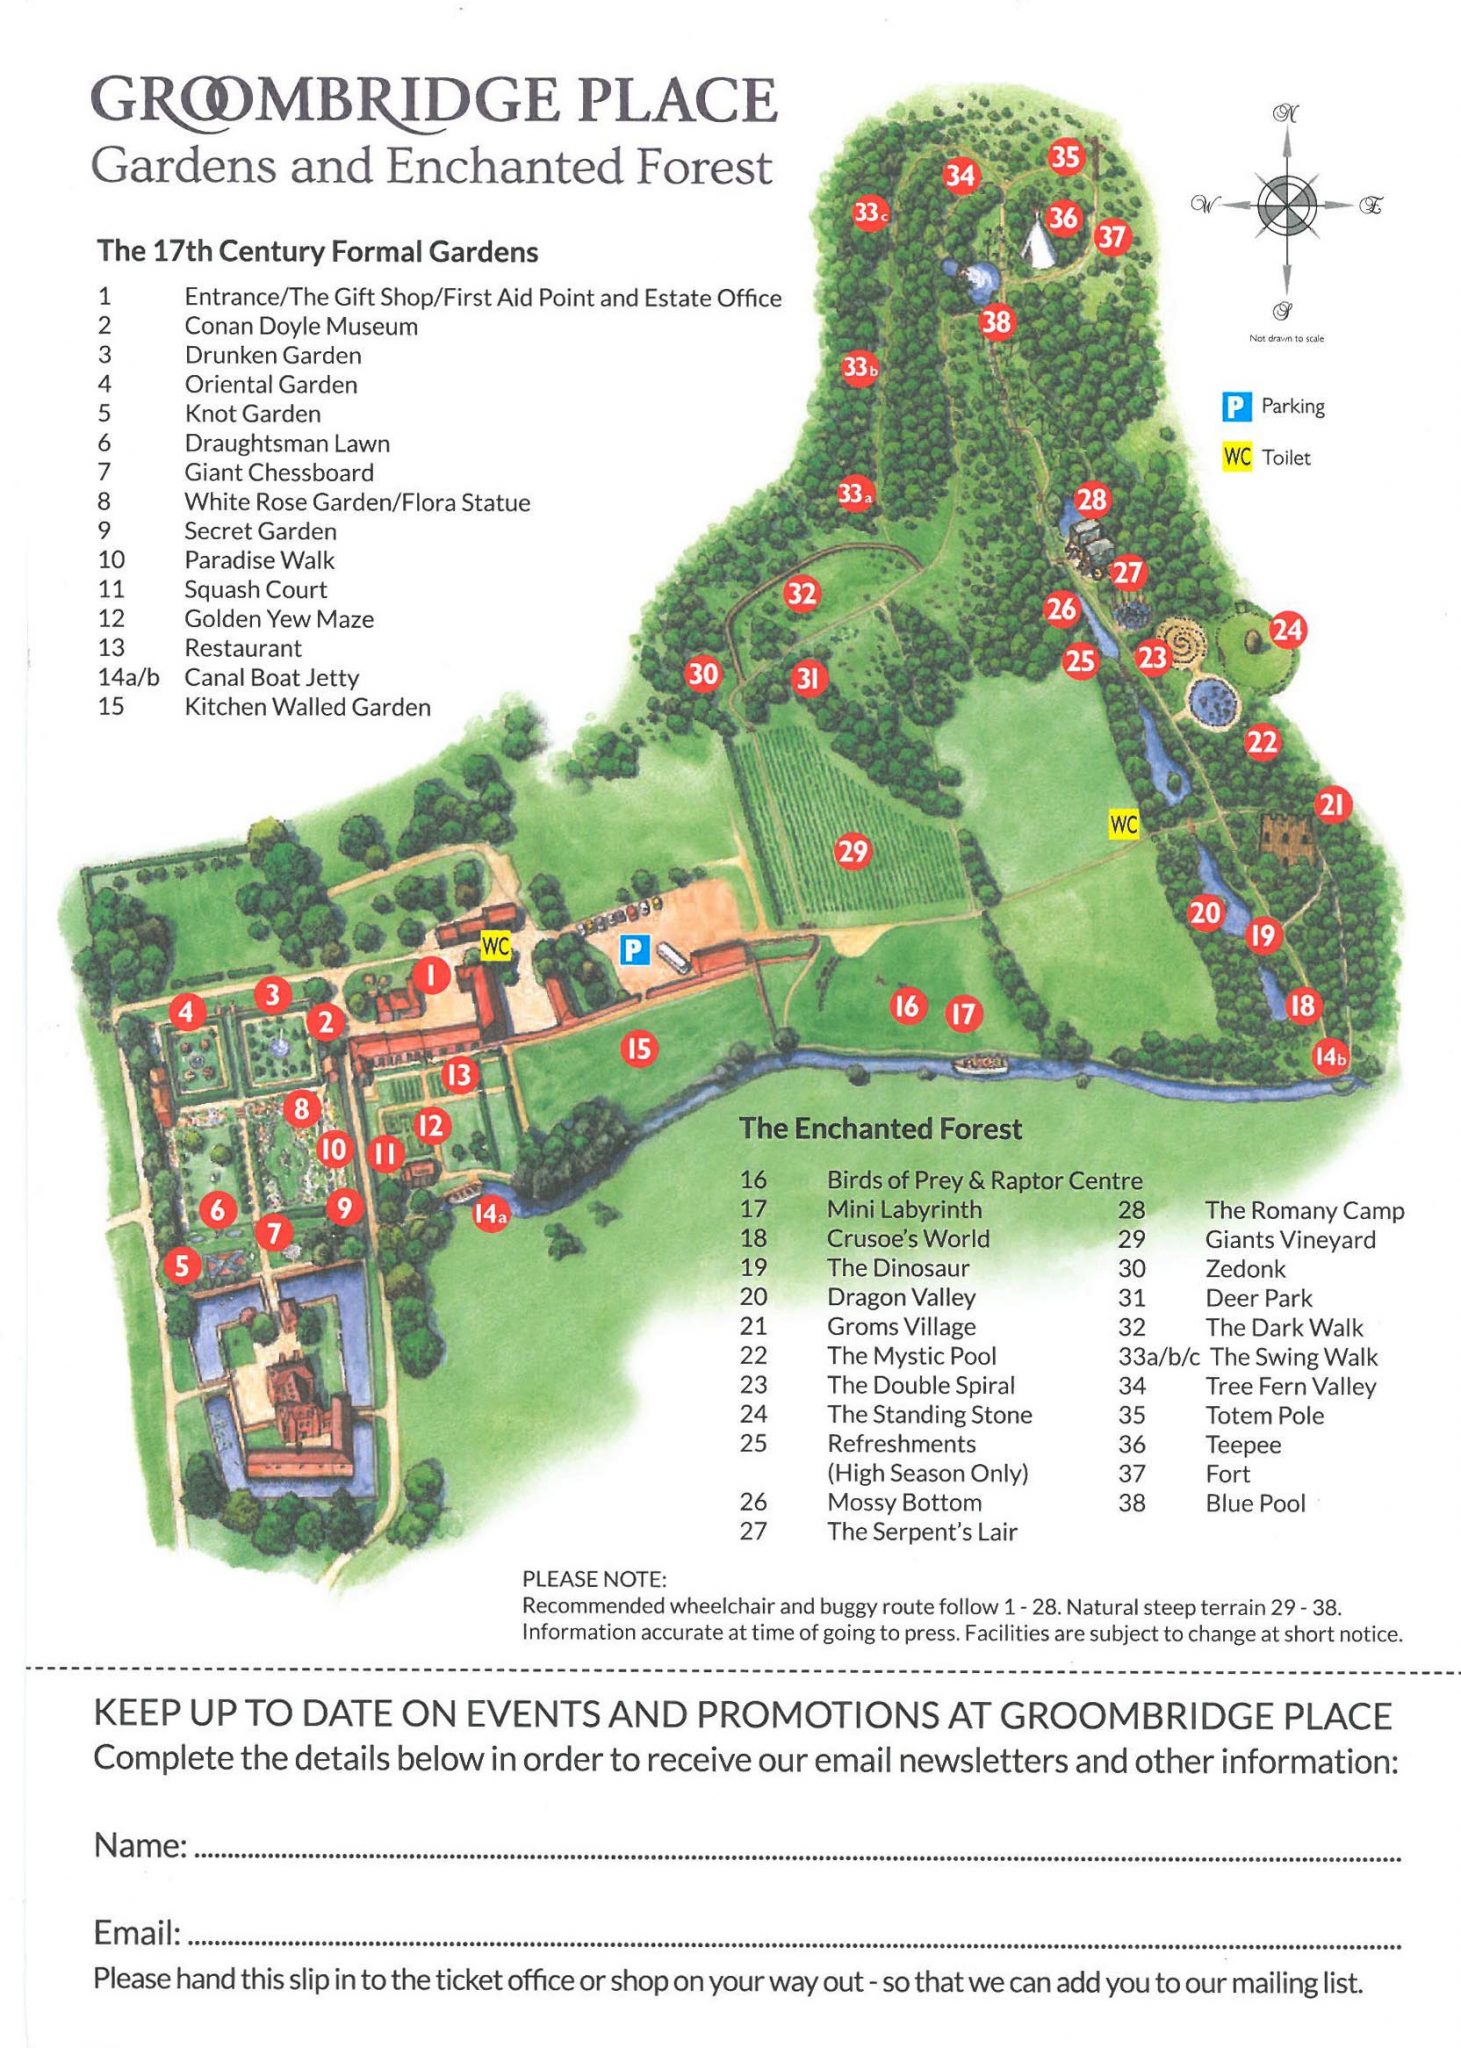 Map of the grounds at Groombridge Place